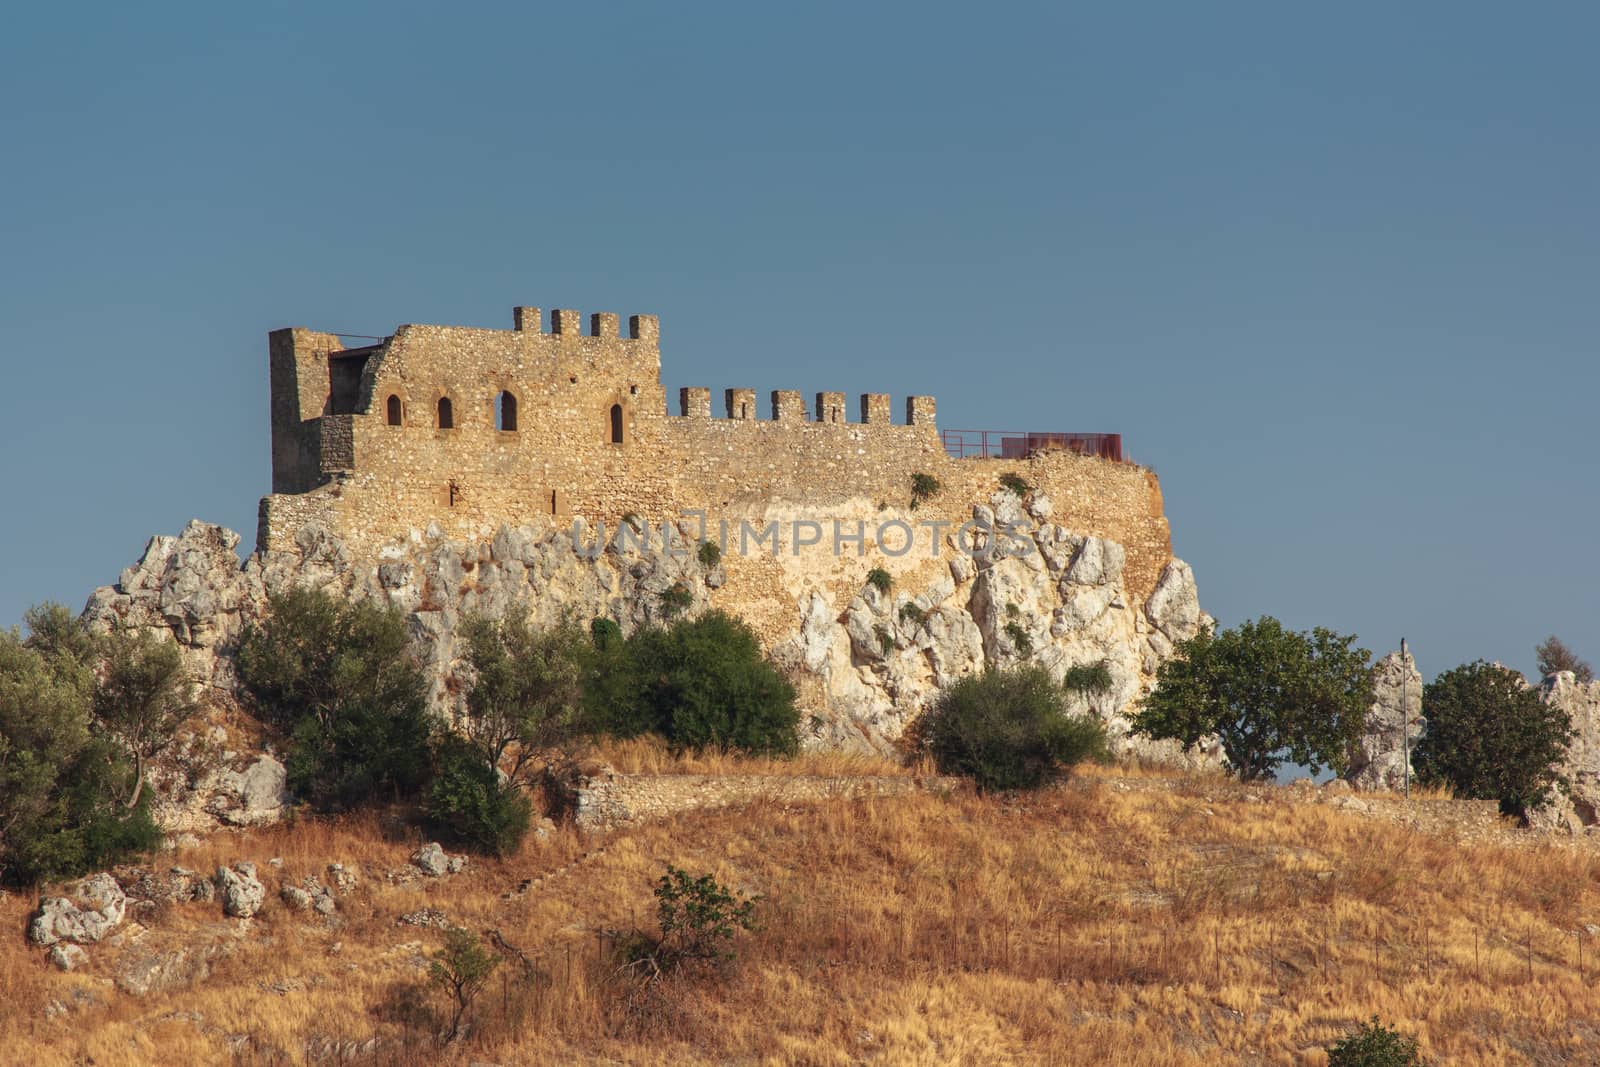 Castle Delia in Sicily, a military fortification, the vanguard of the provinces of Sicily South